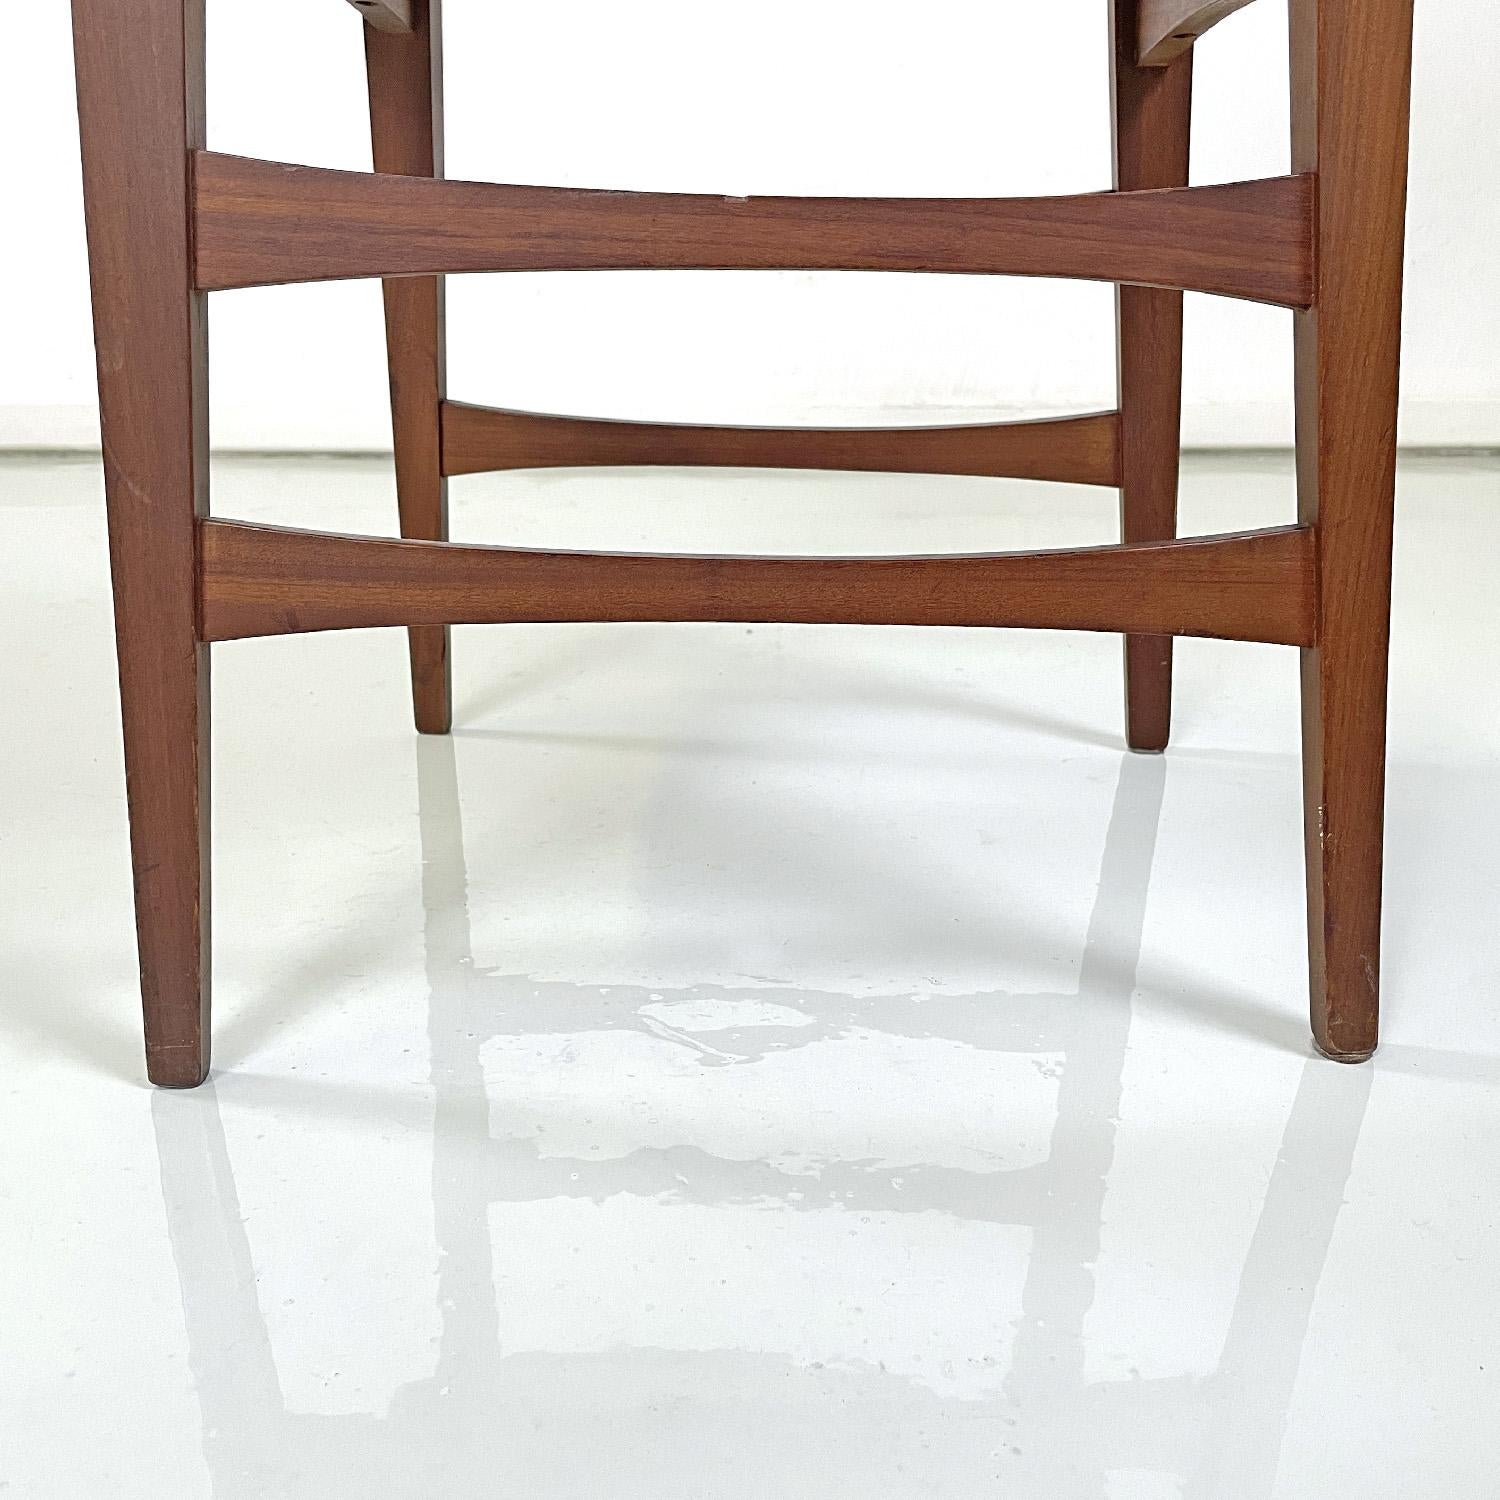 Danish mid-century modern wooden and brown leather chairs, 1950s For Sale 2